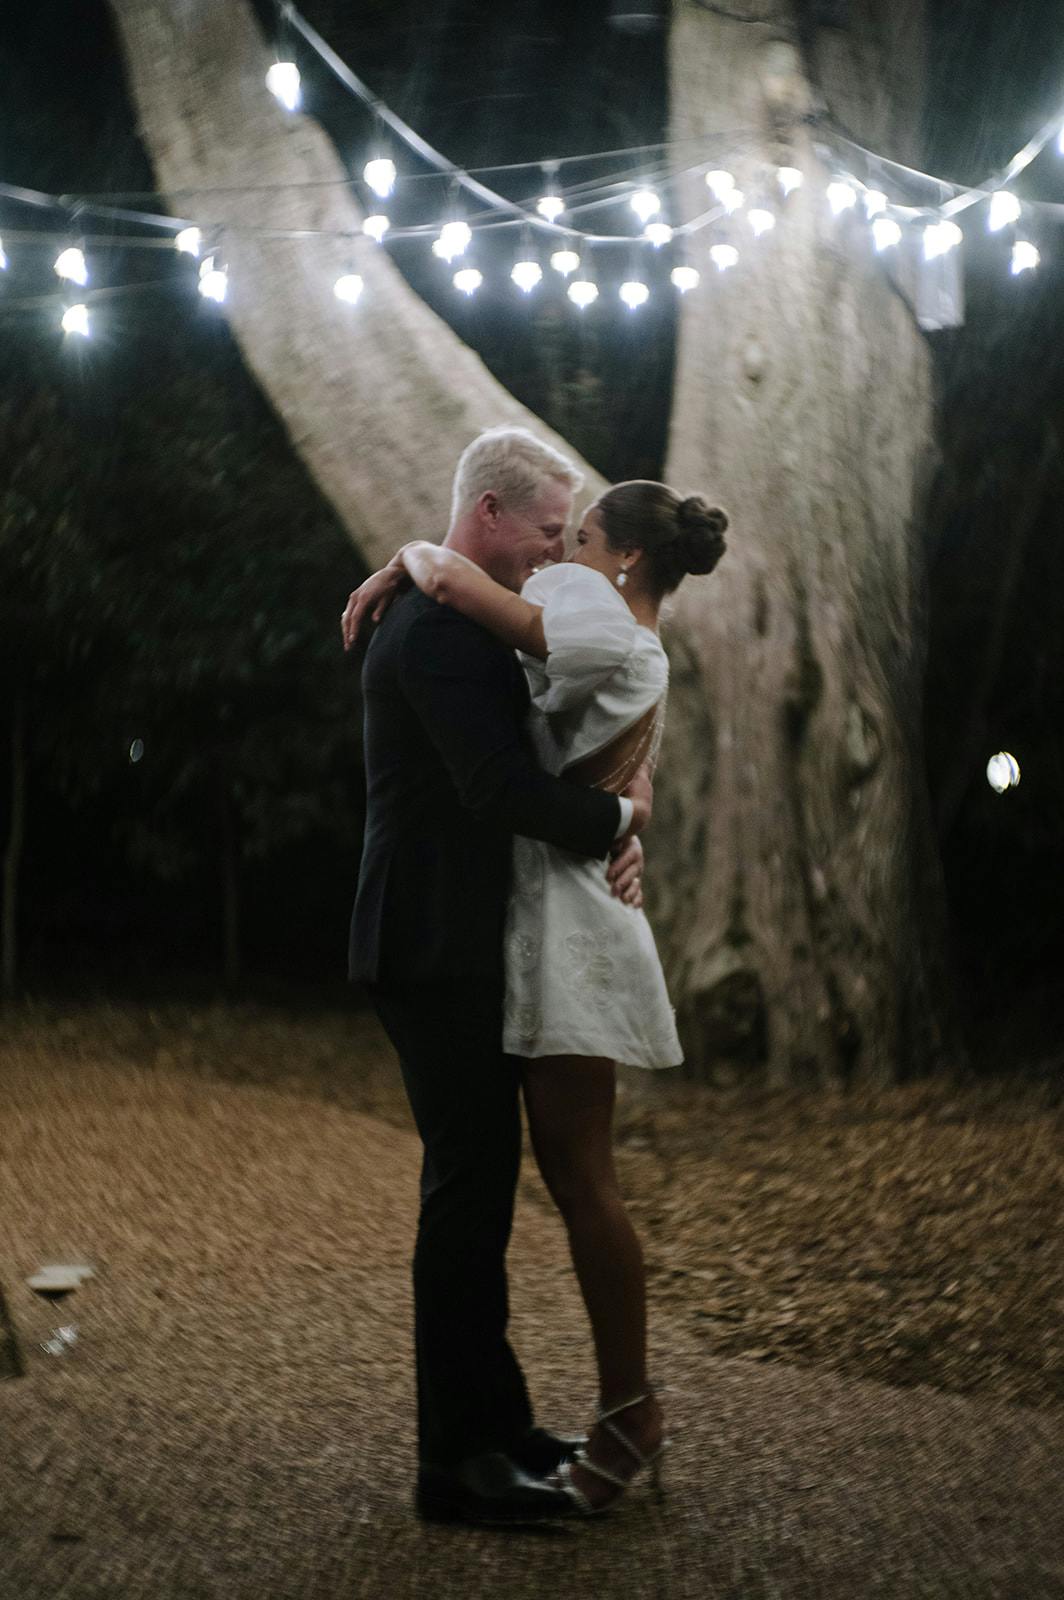 A couple is embracing under string lights at night. The woman is wearing a white dress and the man is in a dark suit. They are standing on a dirt path surrounded by trees, creating a romantic and intimate atmosphere.